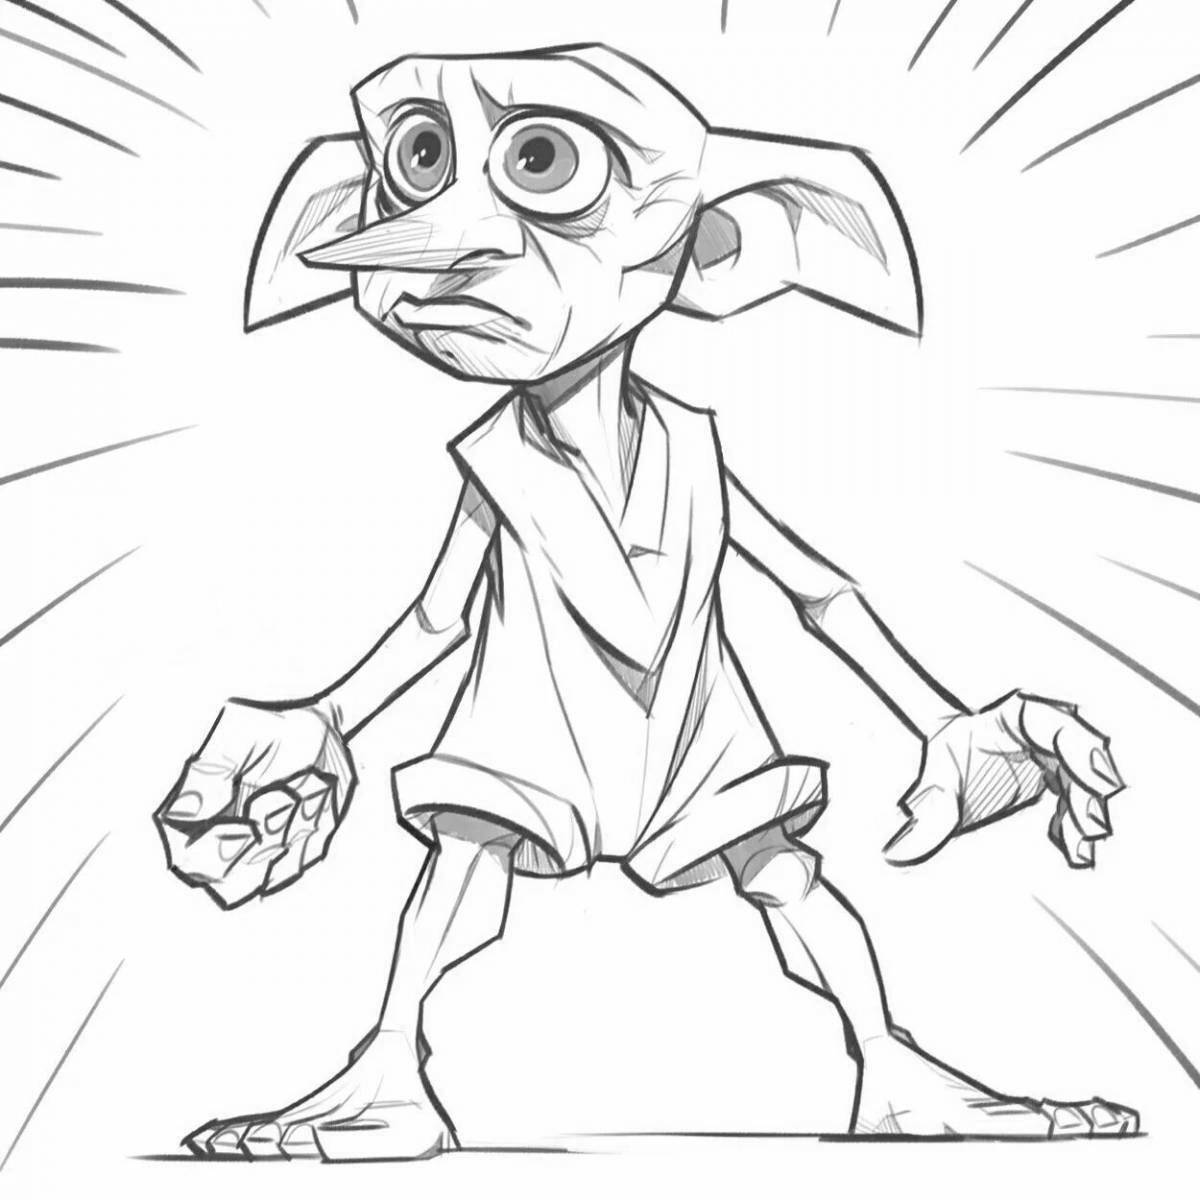 Cute dobby coloring